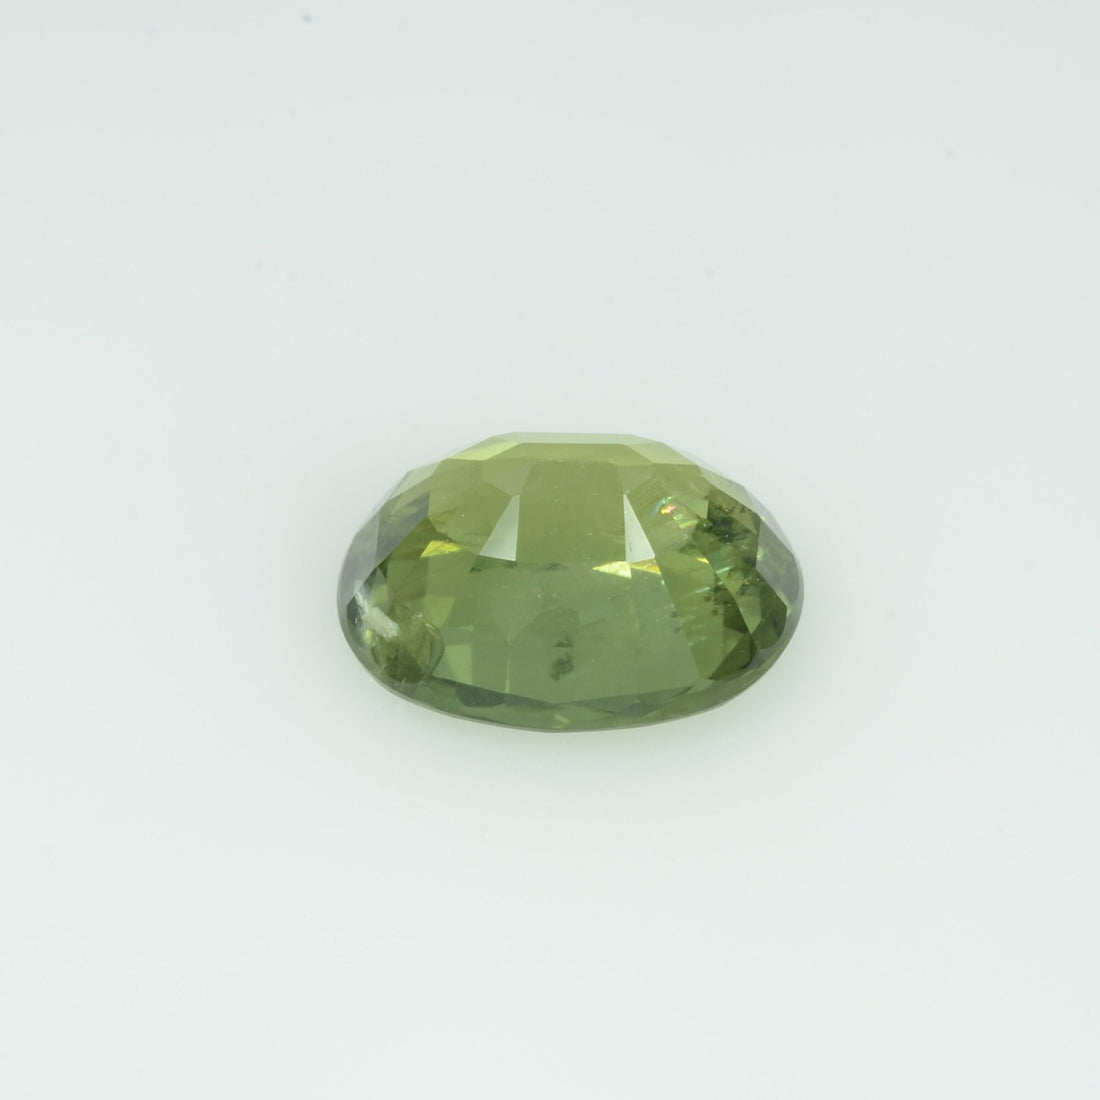 2.60 Cts Natural Green Sapphire Loose Gemstone Oval Cut